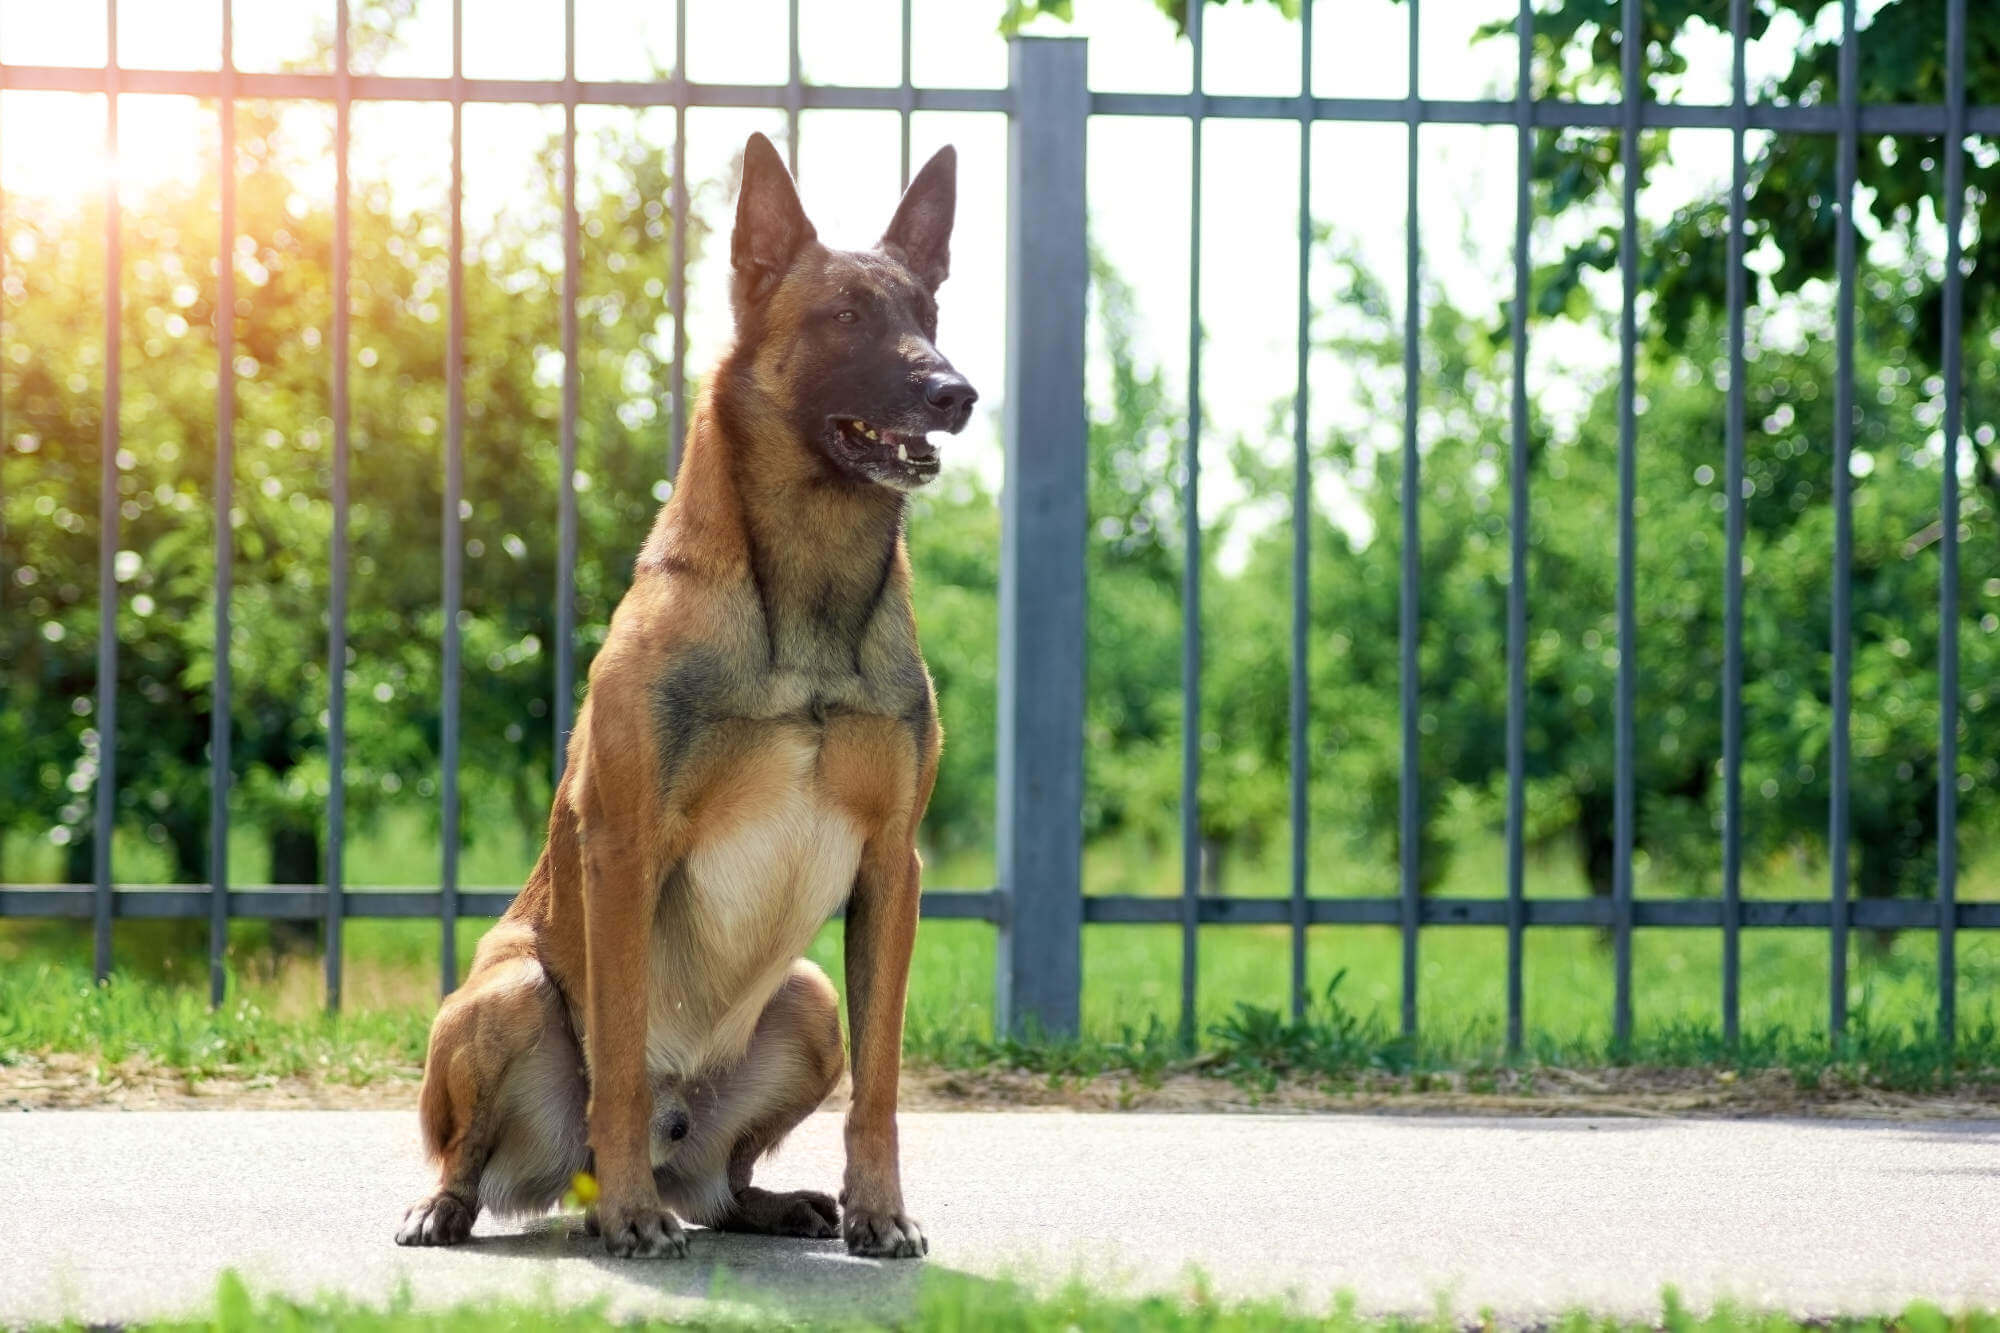 German Shephard on-guard in front of a wrought-iron fence